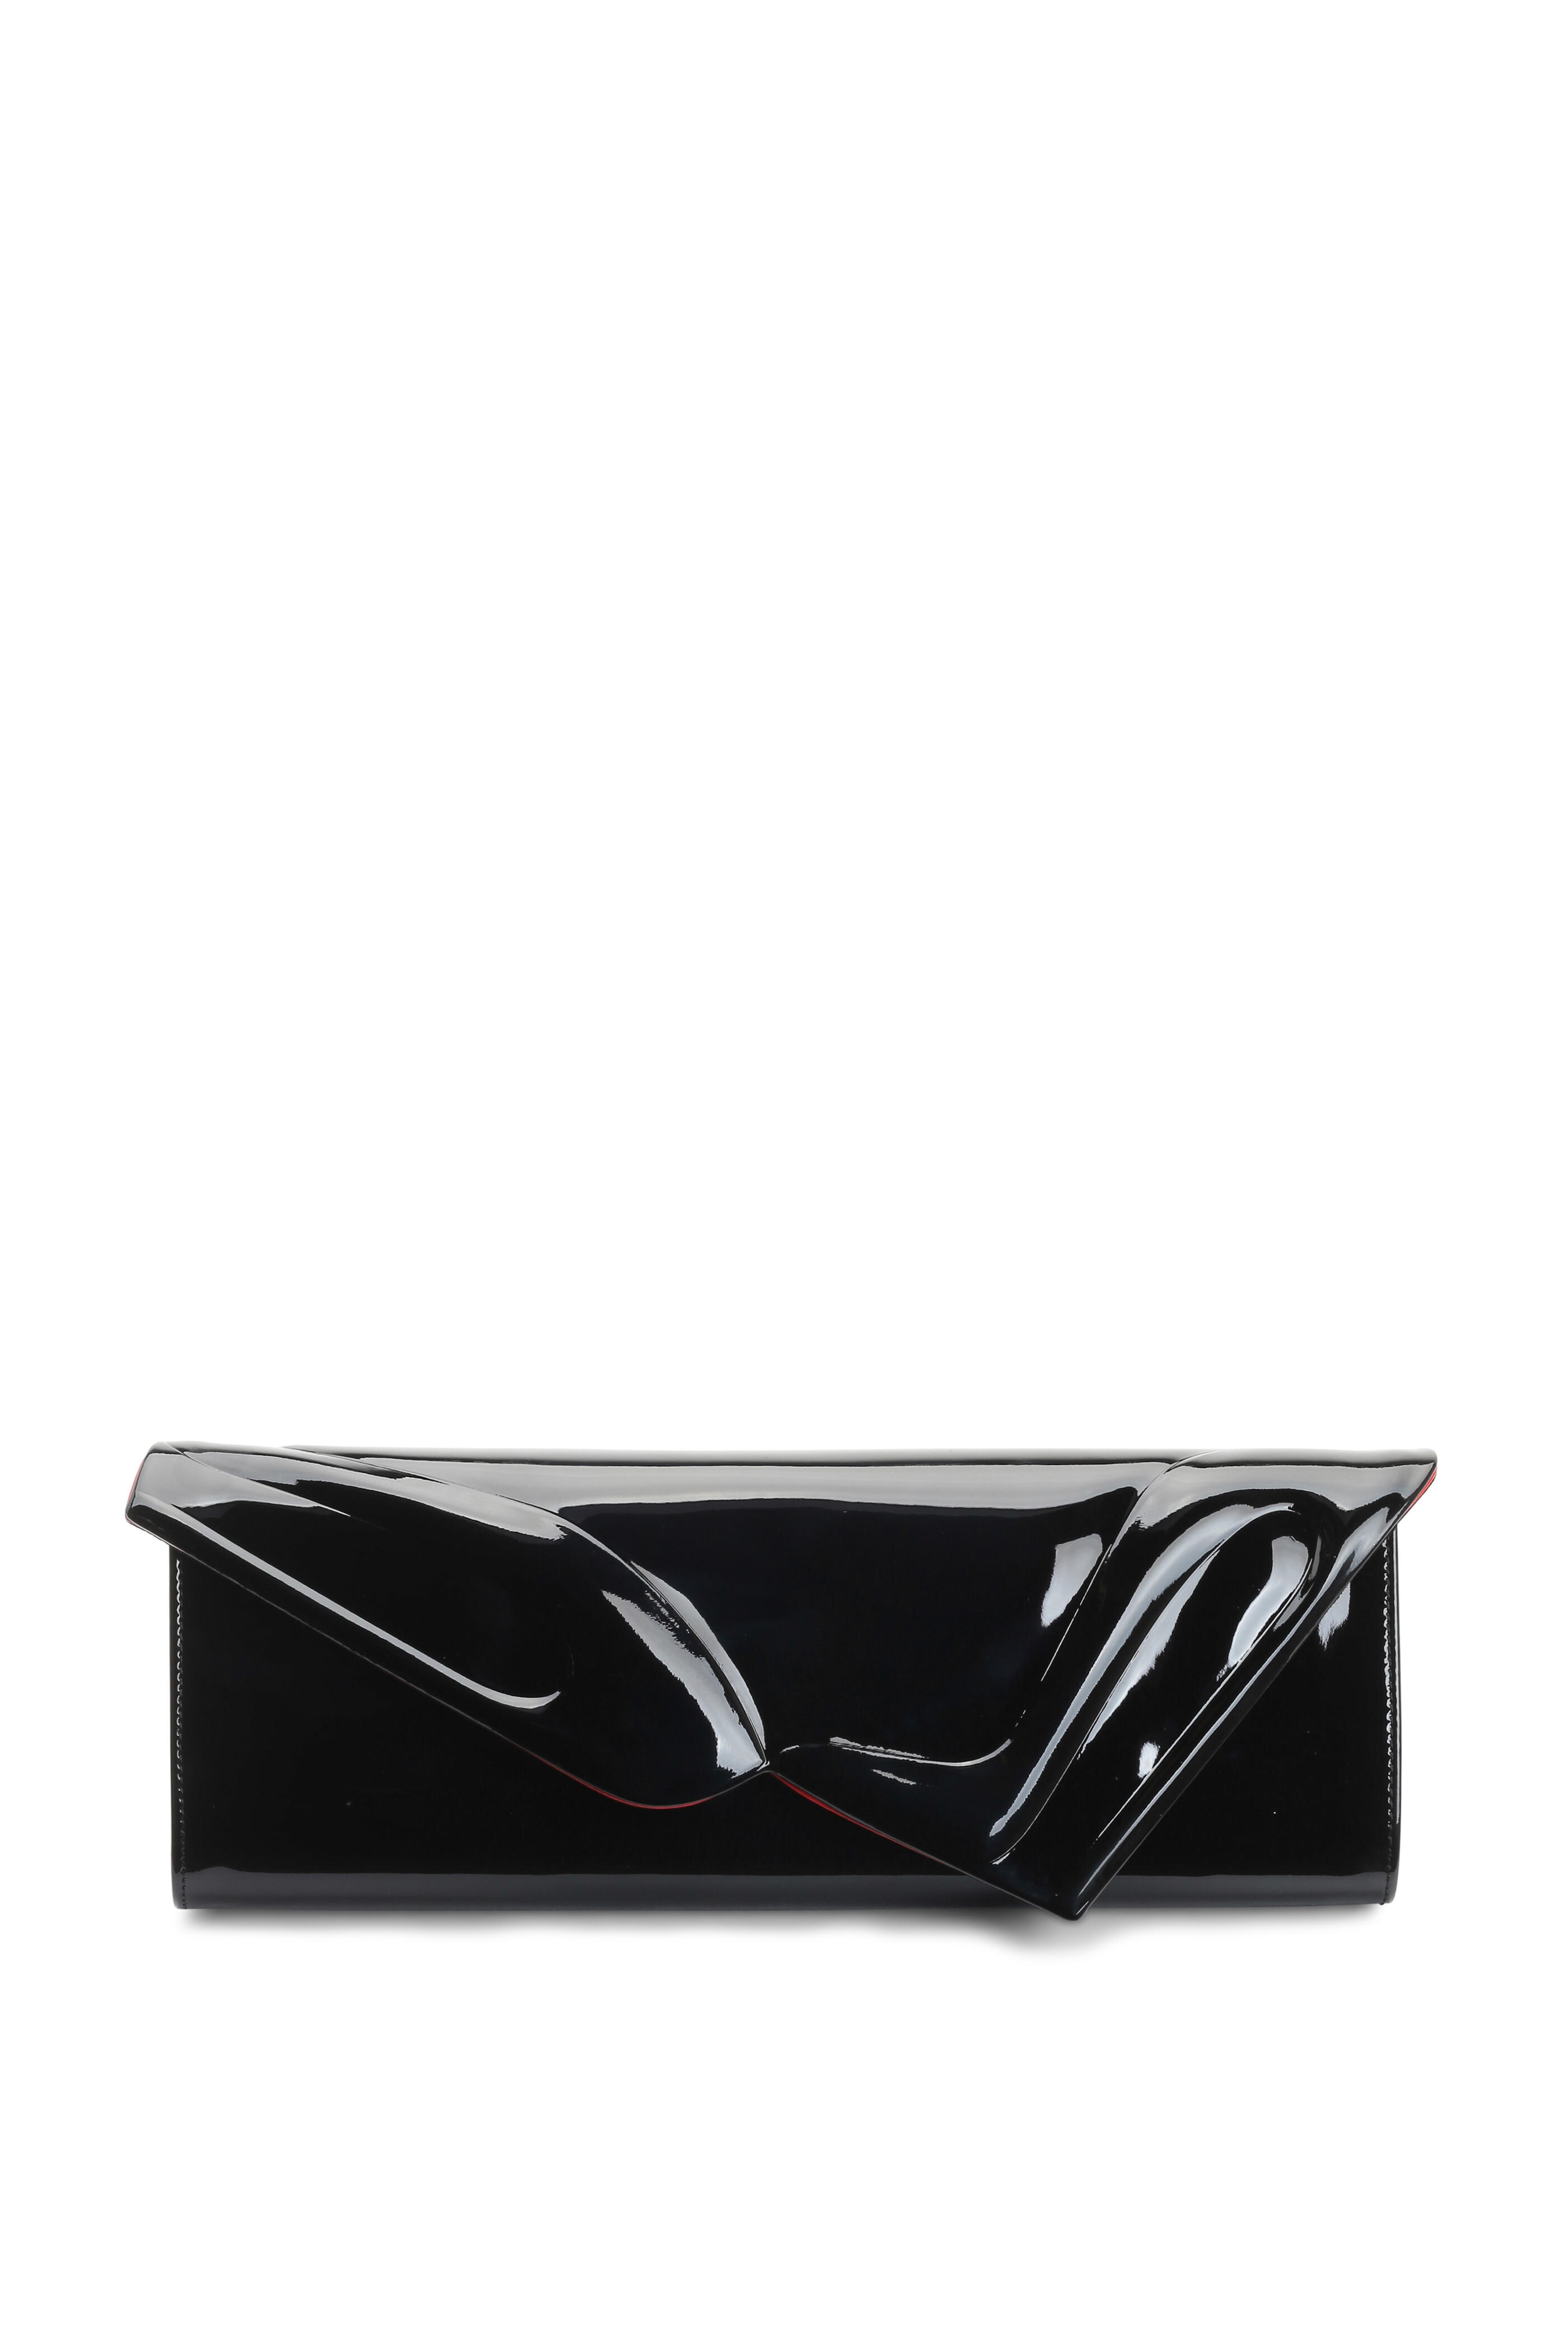 Christian Louboutin - So Kate Black Patent Leather Clutch